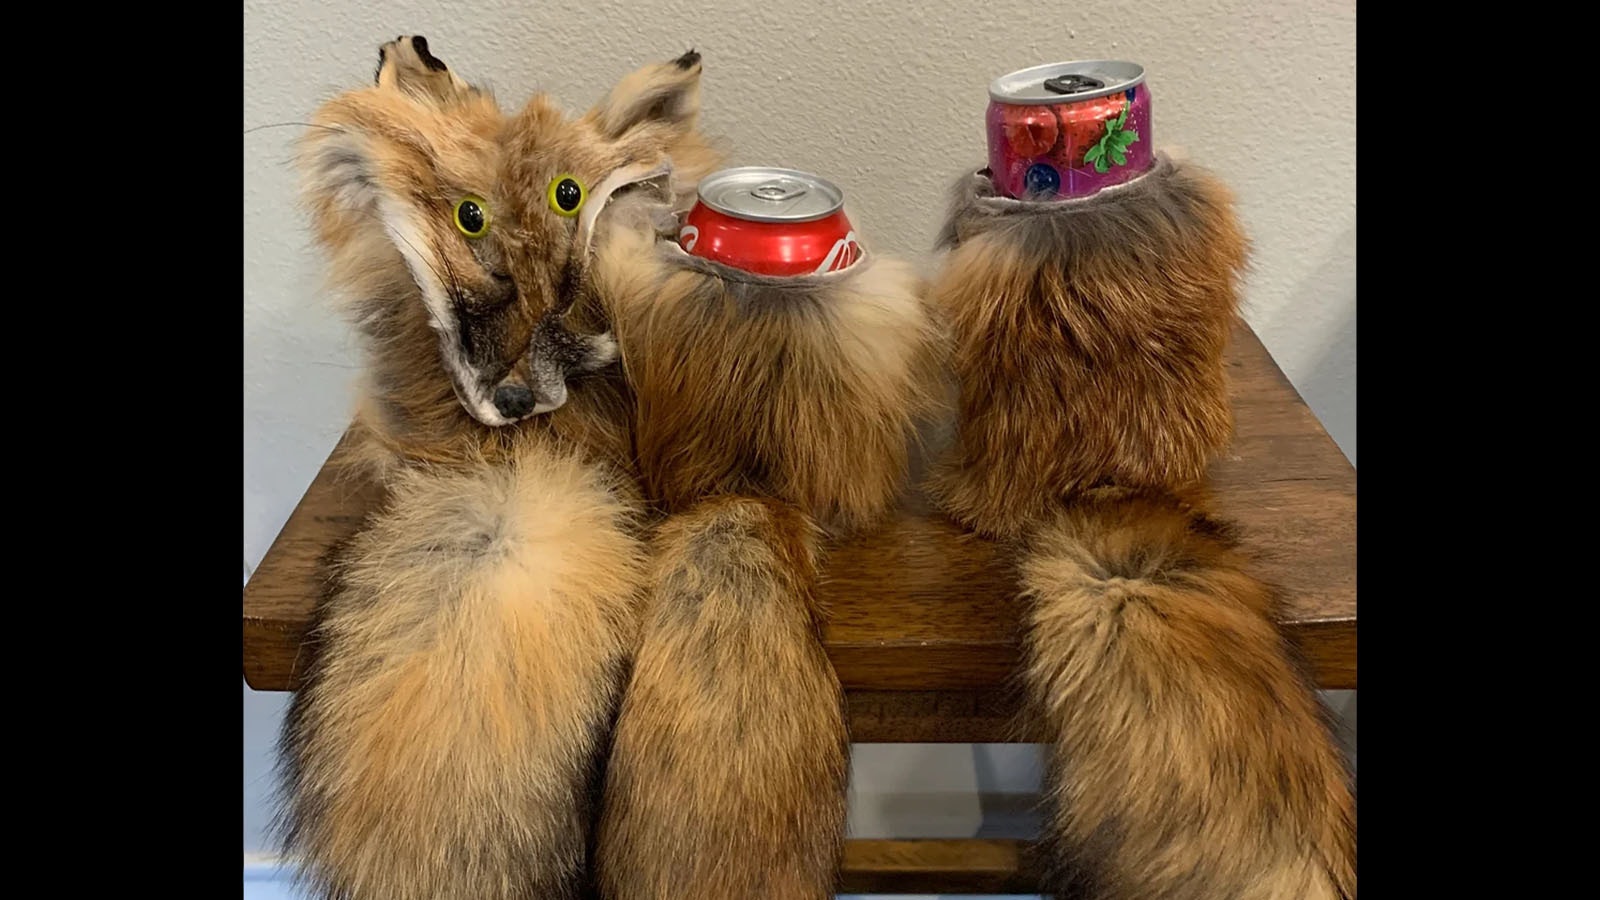 The Foozie, a koozie made from a fox.